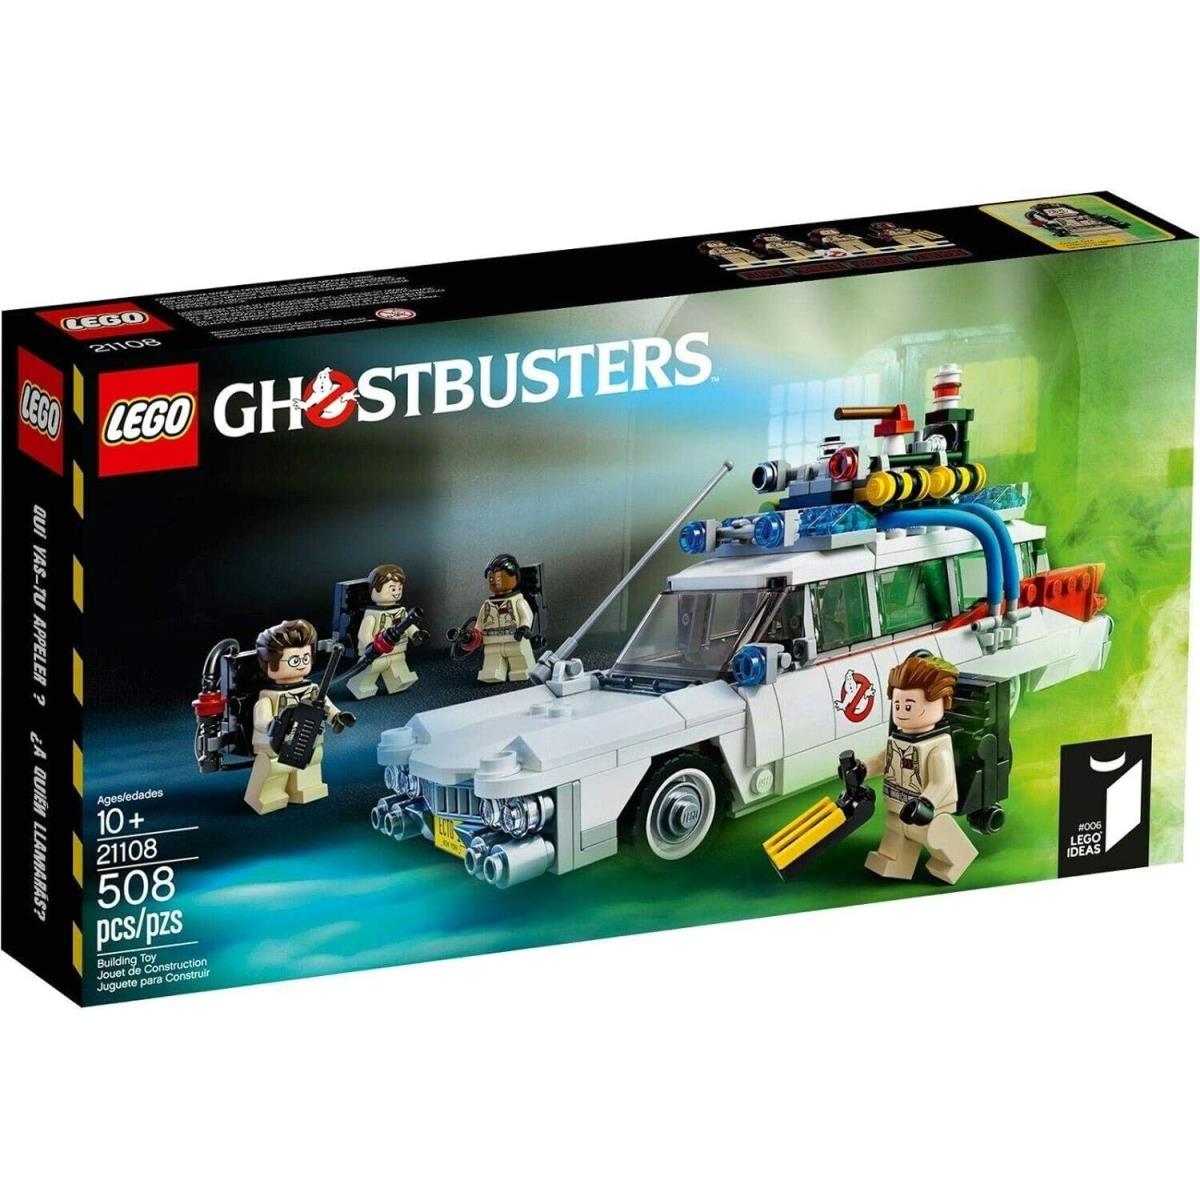 Lego 21108 - Lego Ideas: Ghostbusters - Ghostbusters Ecto-1 - 2014